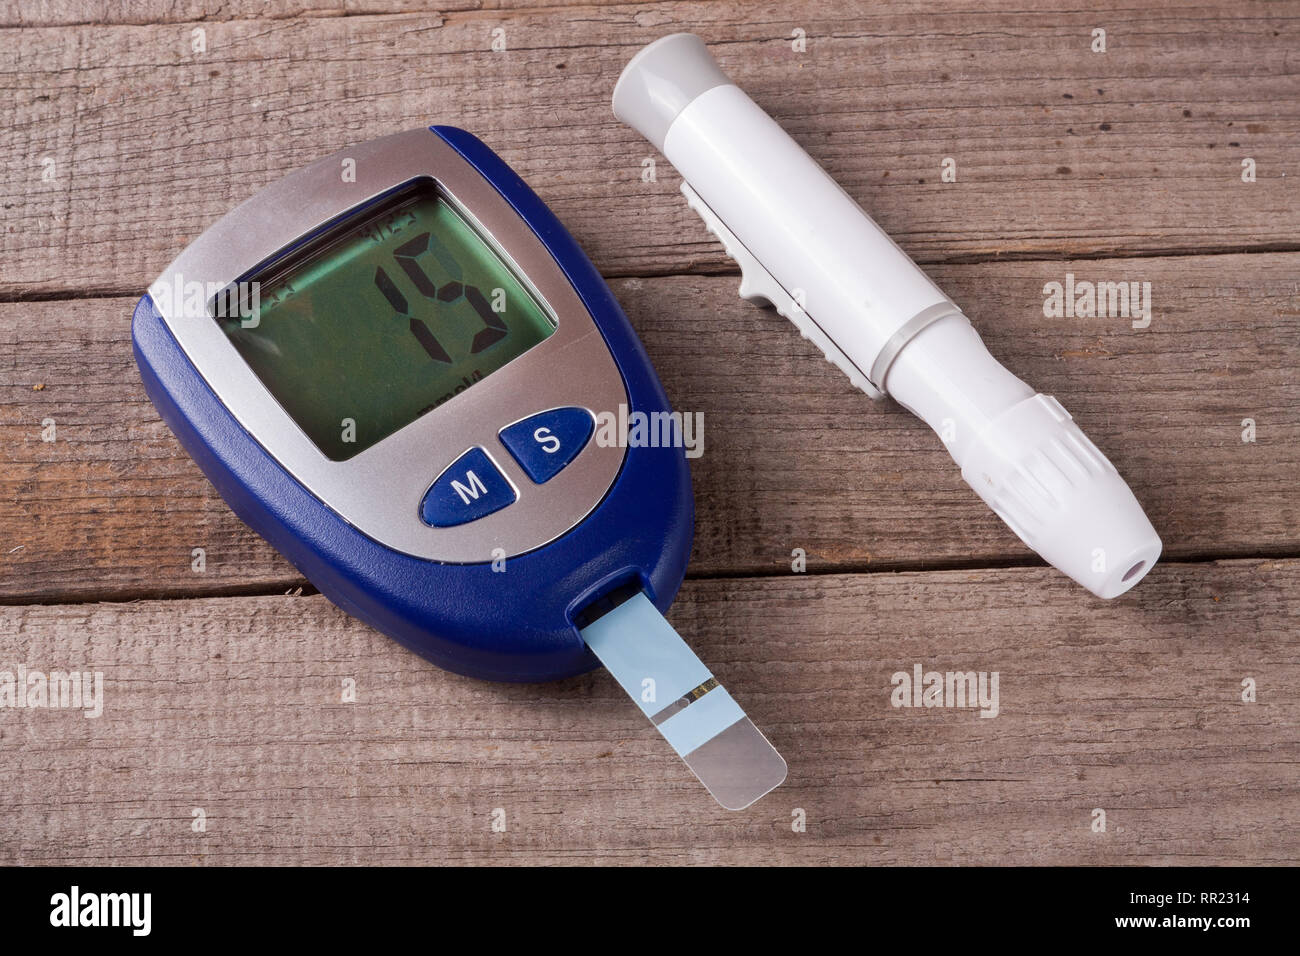 Studio shot of One Touch Ultra diabetes glucose meter and vial of test  strips Stock Photo - Alamy